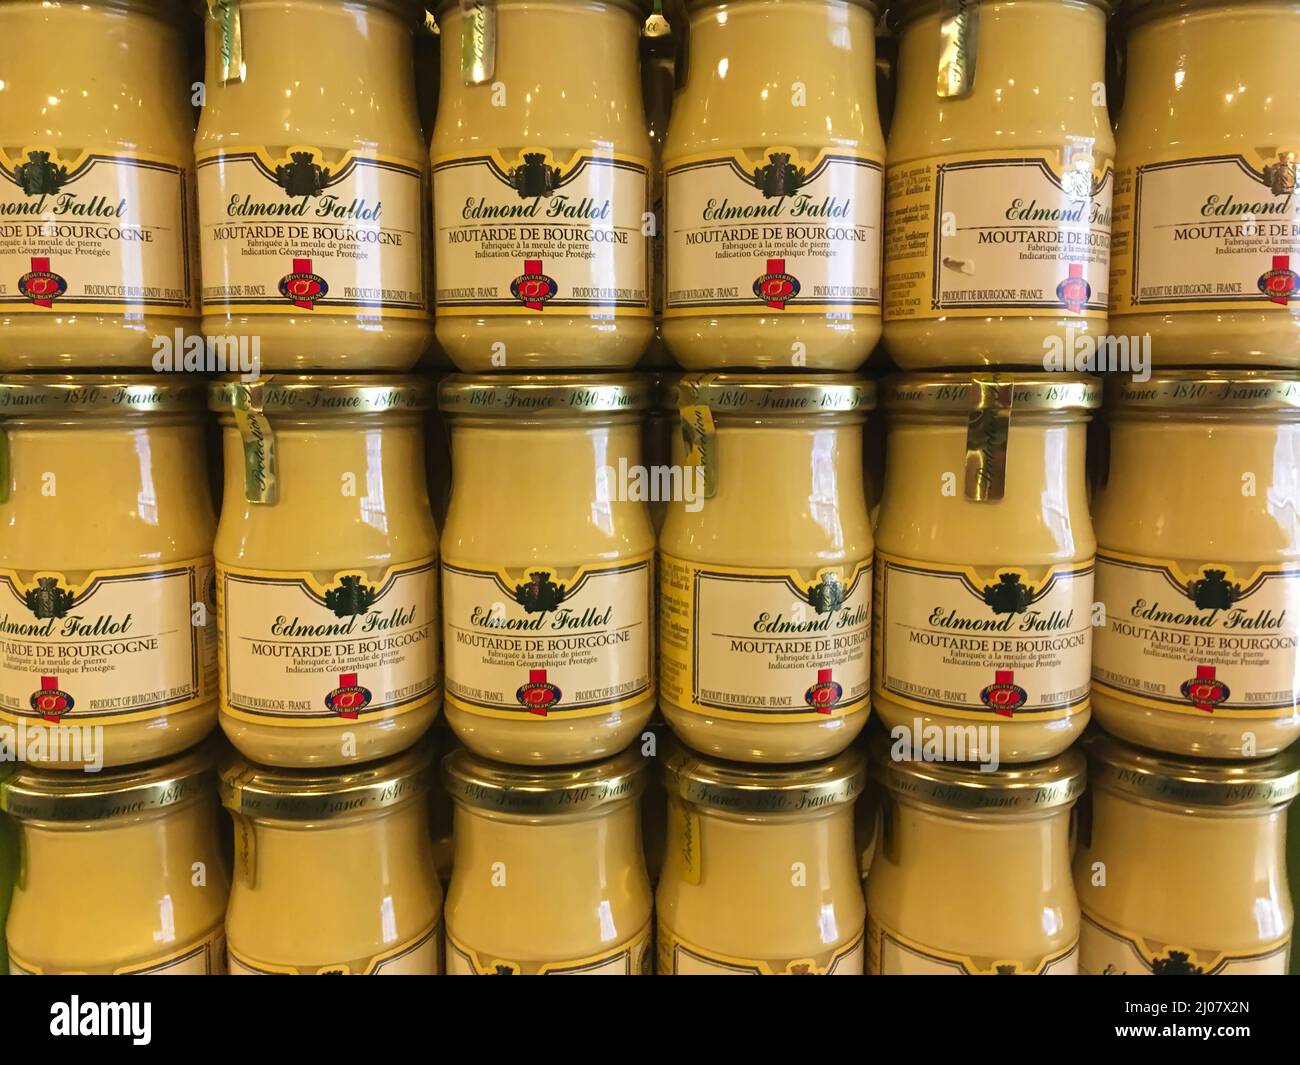 French Mustard from Dijon, France. *** Local Caption ***  mustard,can,glass jar,many,ambundace,side by side,in a row,beauty,food,fod and drink,savory, Stock Photo